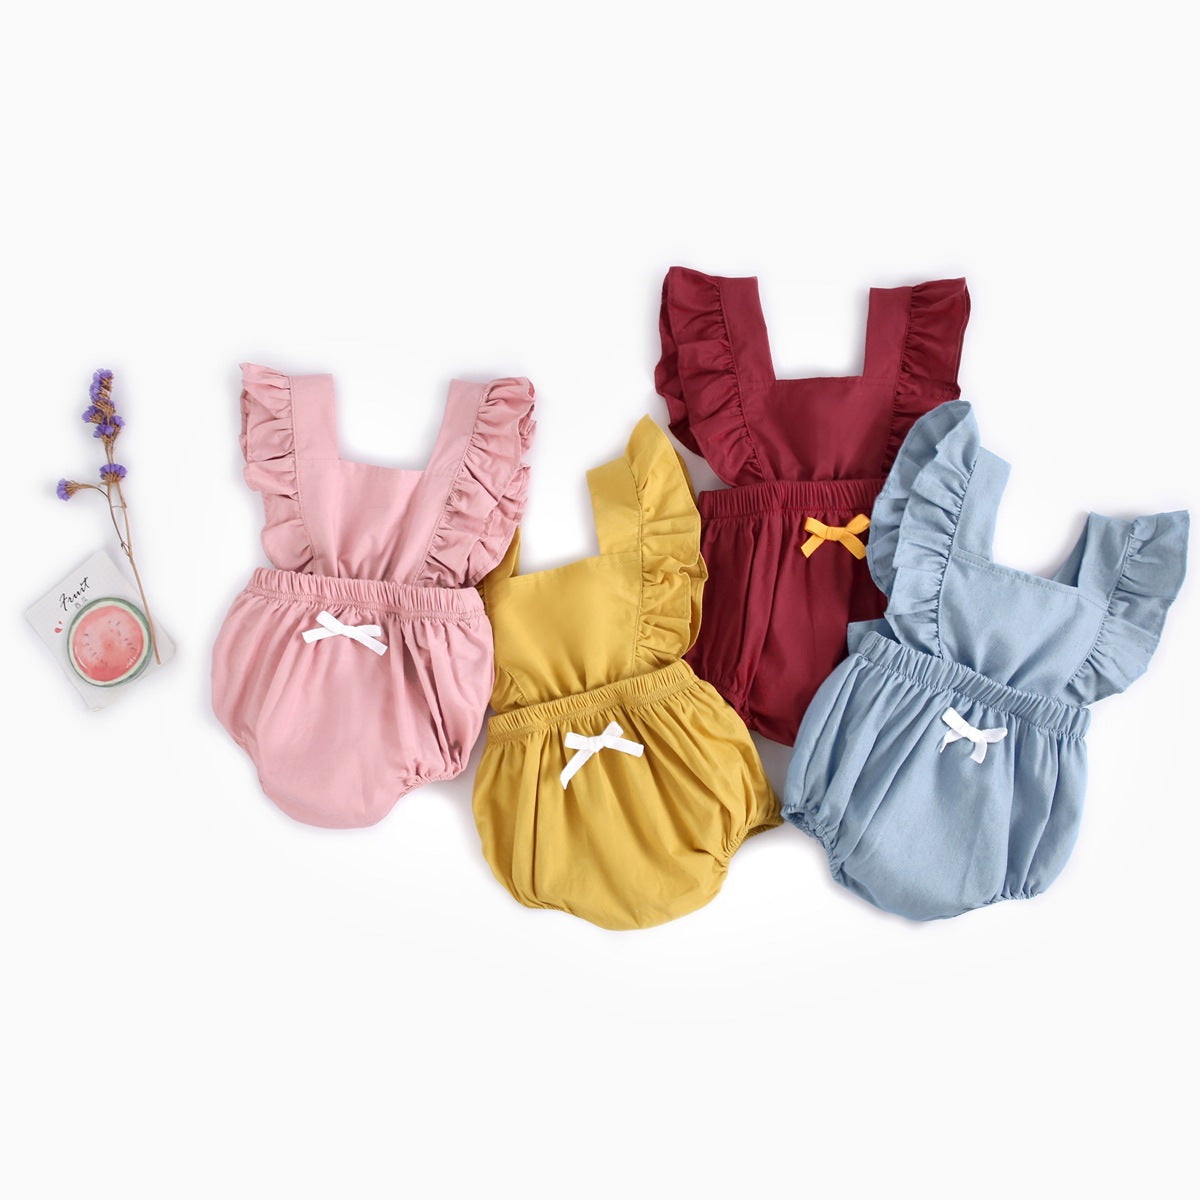 Baby Girl Square Collar Lace Design Denim Fabric Sleeveless Backless Onesies With Bow Decoration My Kids-USA